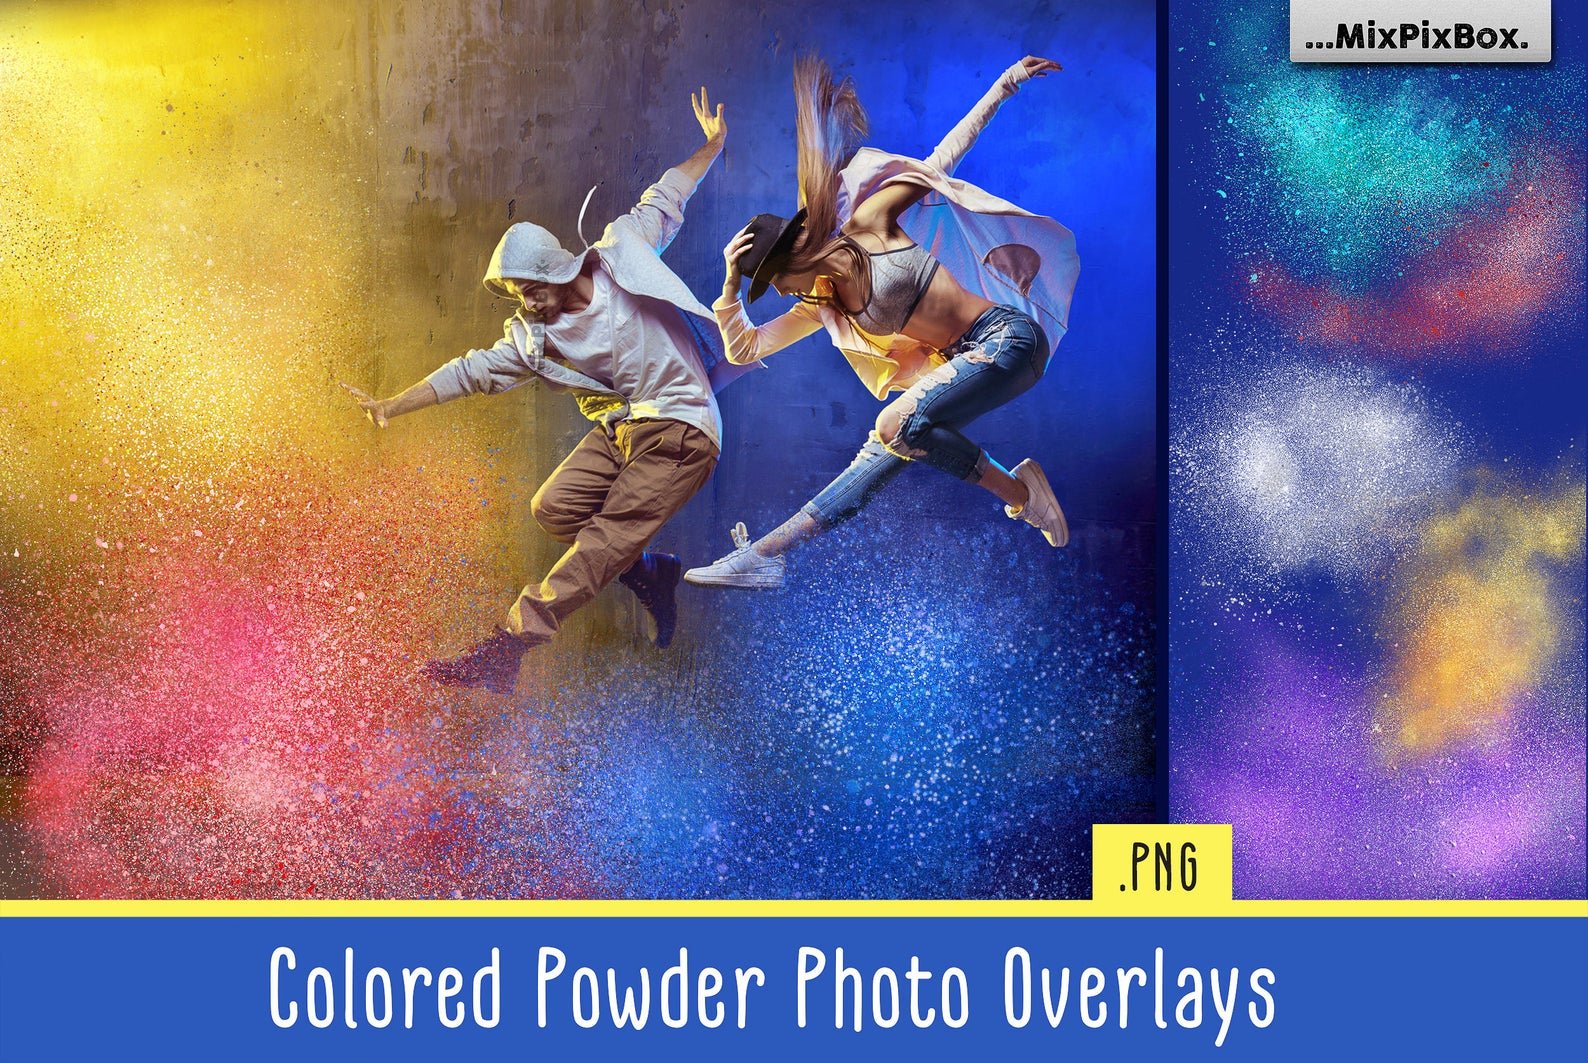 Colored Powder Photo Overlayscover image.